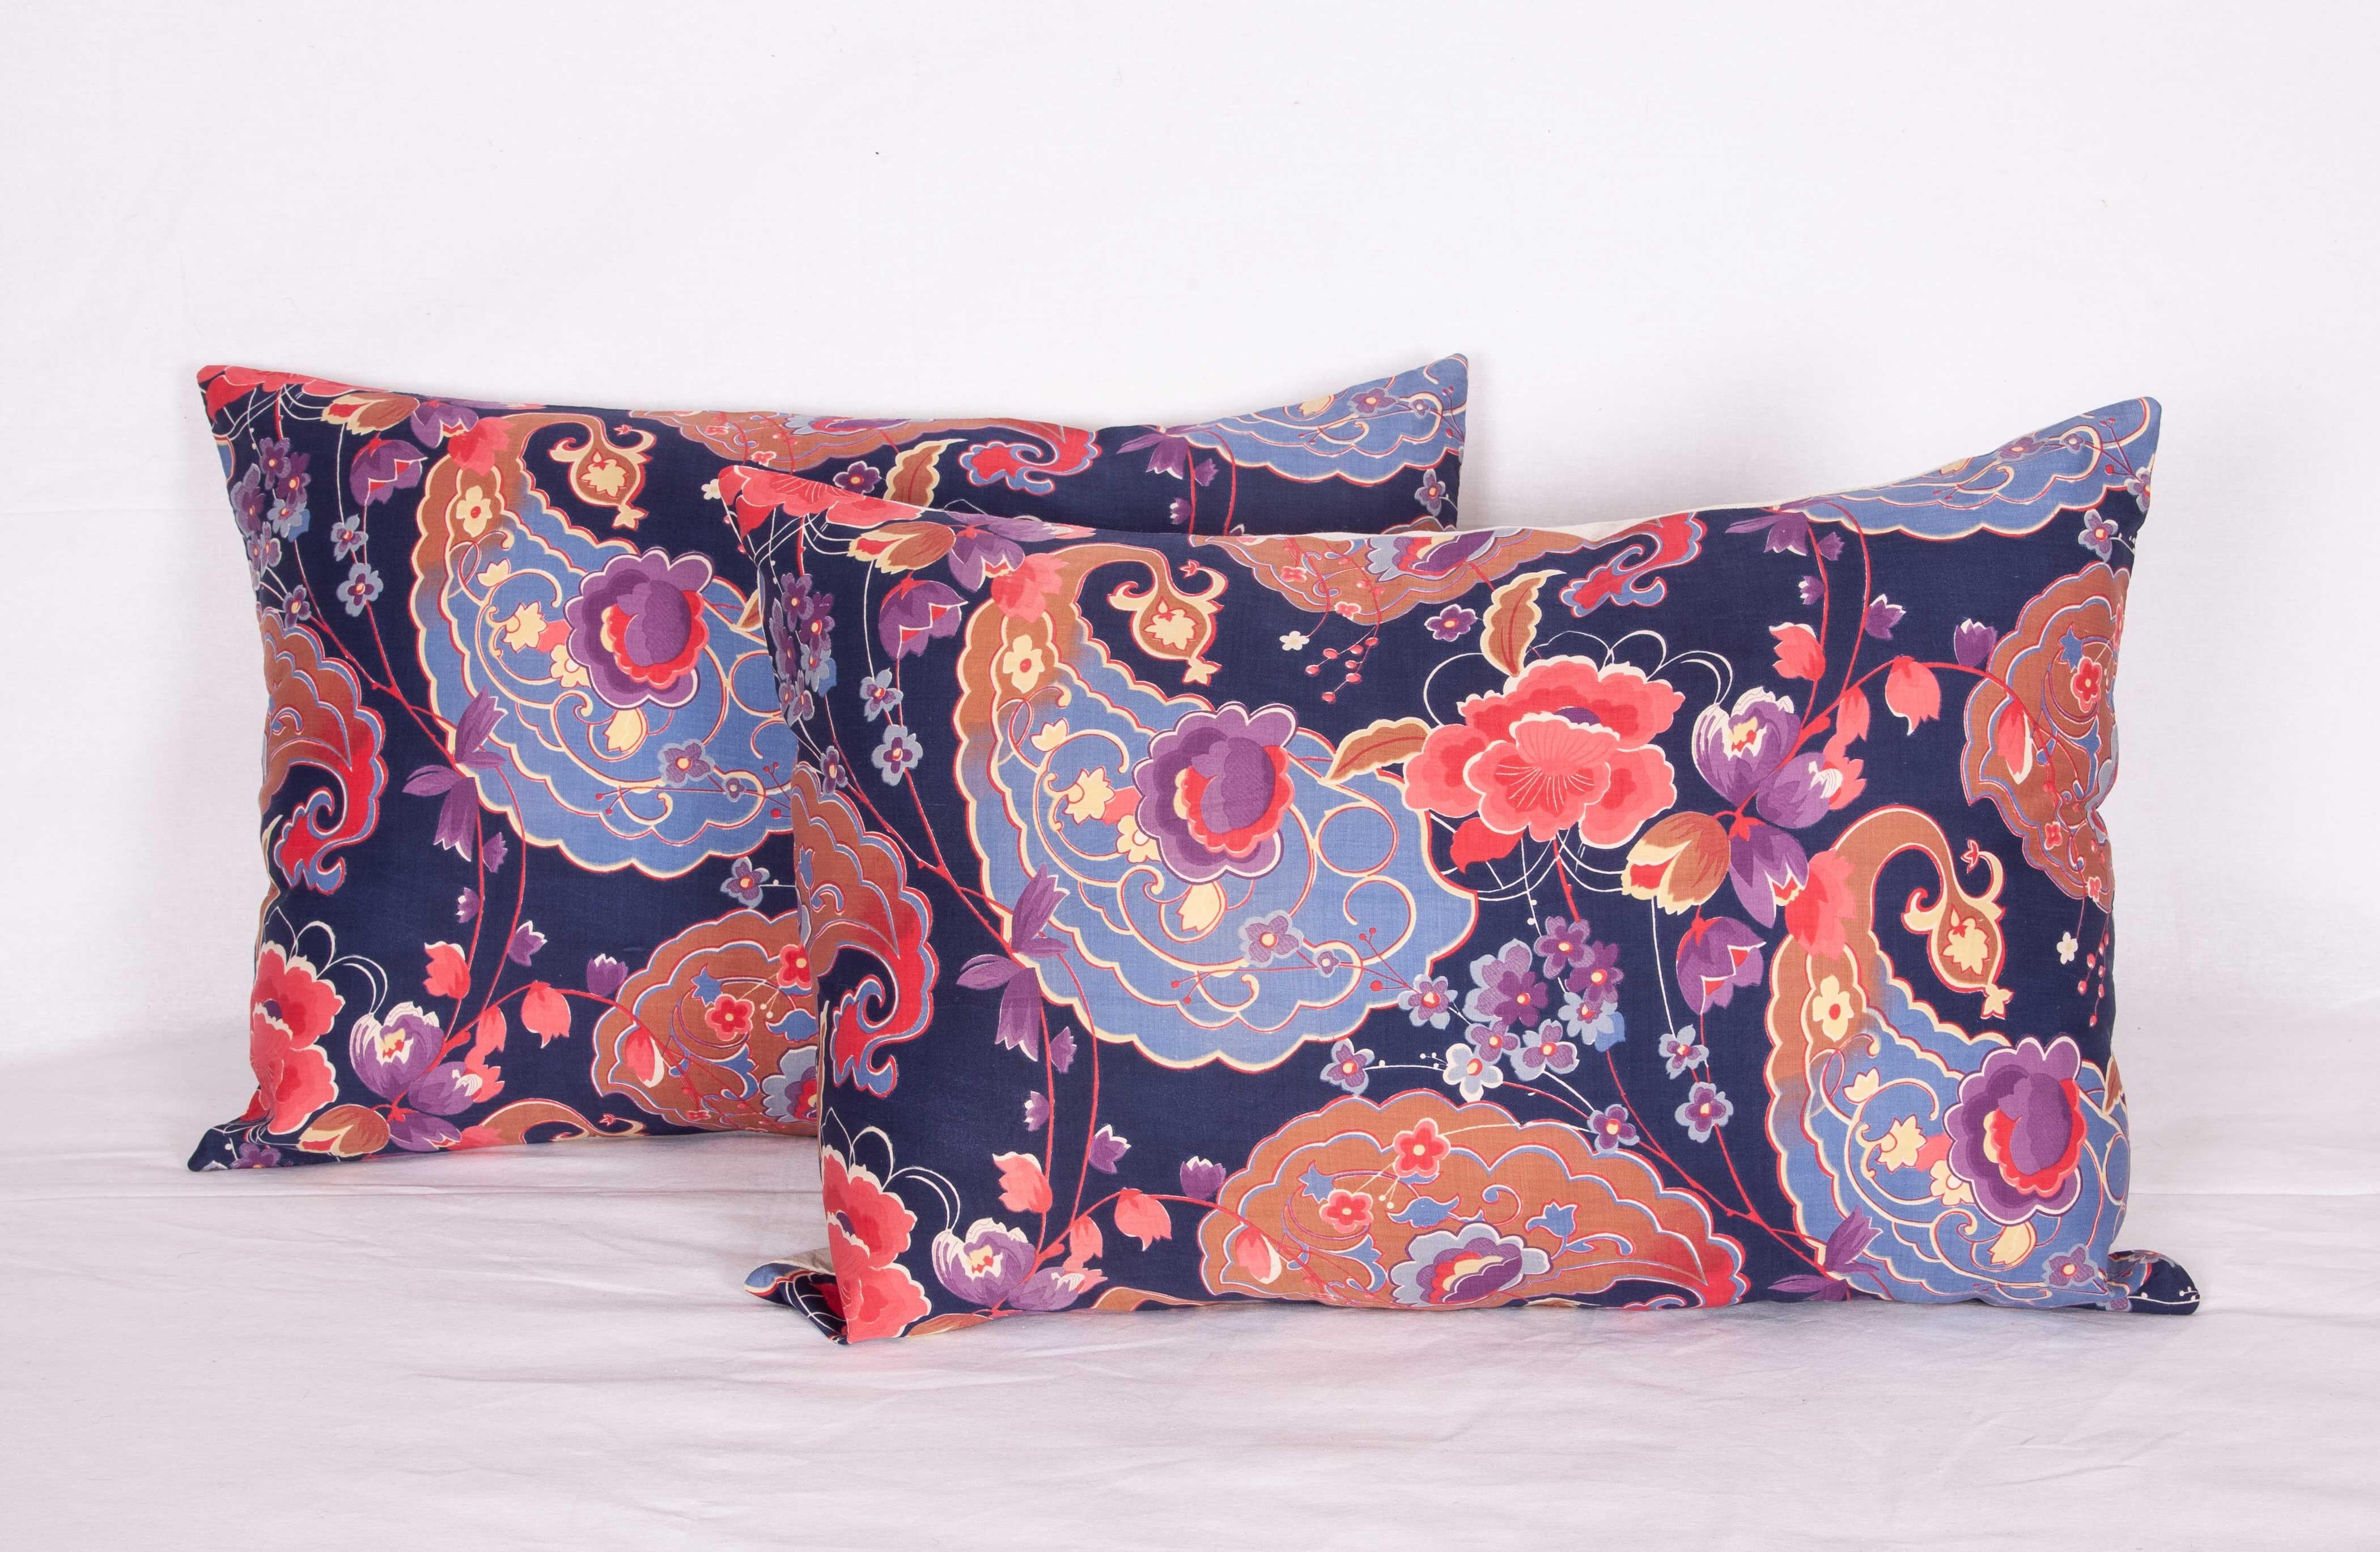 Woven Pillow Cases Fashioned from Mid-20th Century Russian Printed Cotton